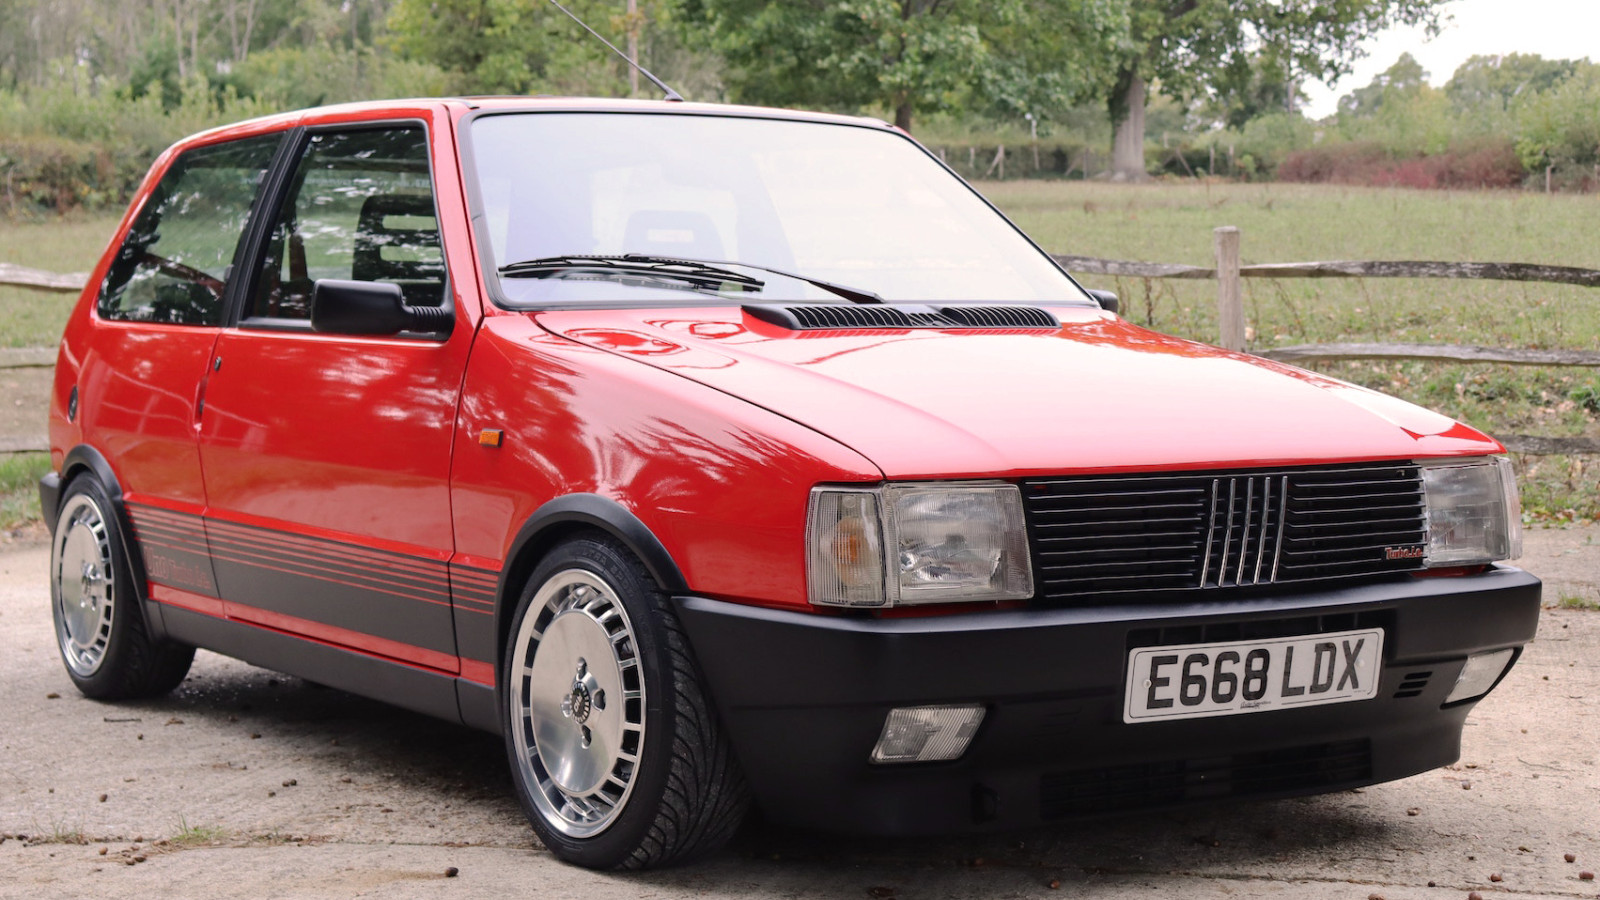 1990 FIAT UNO TURBO IE for sale by auction in Bedfordshire, United Kingdom